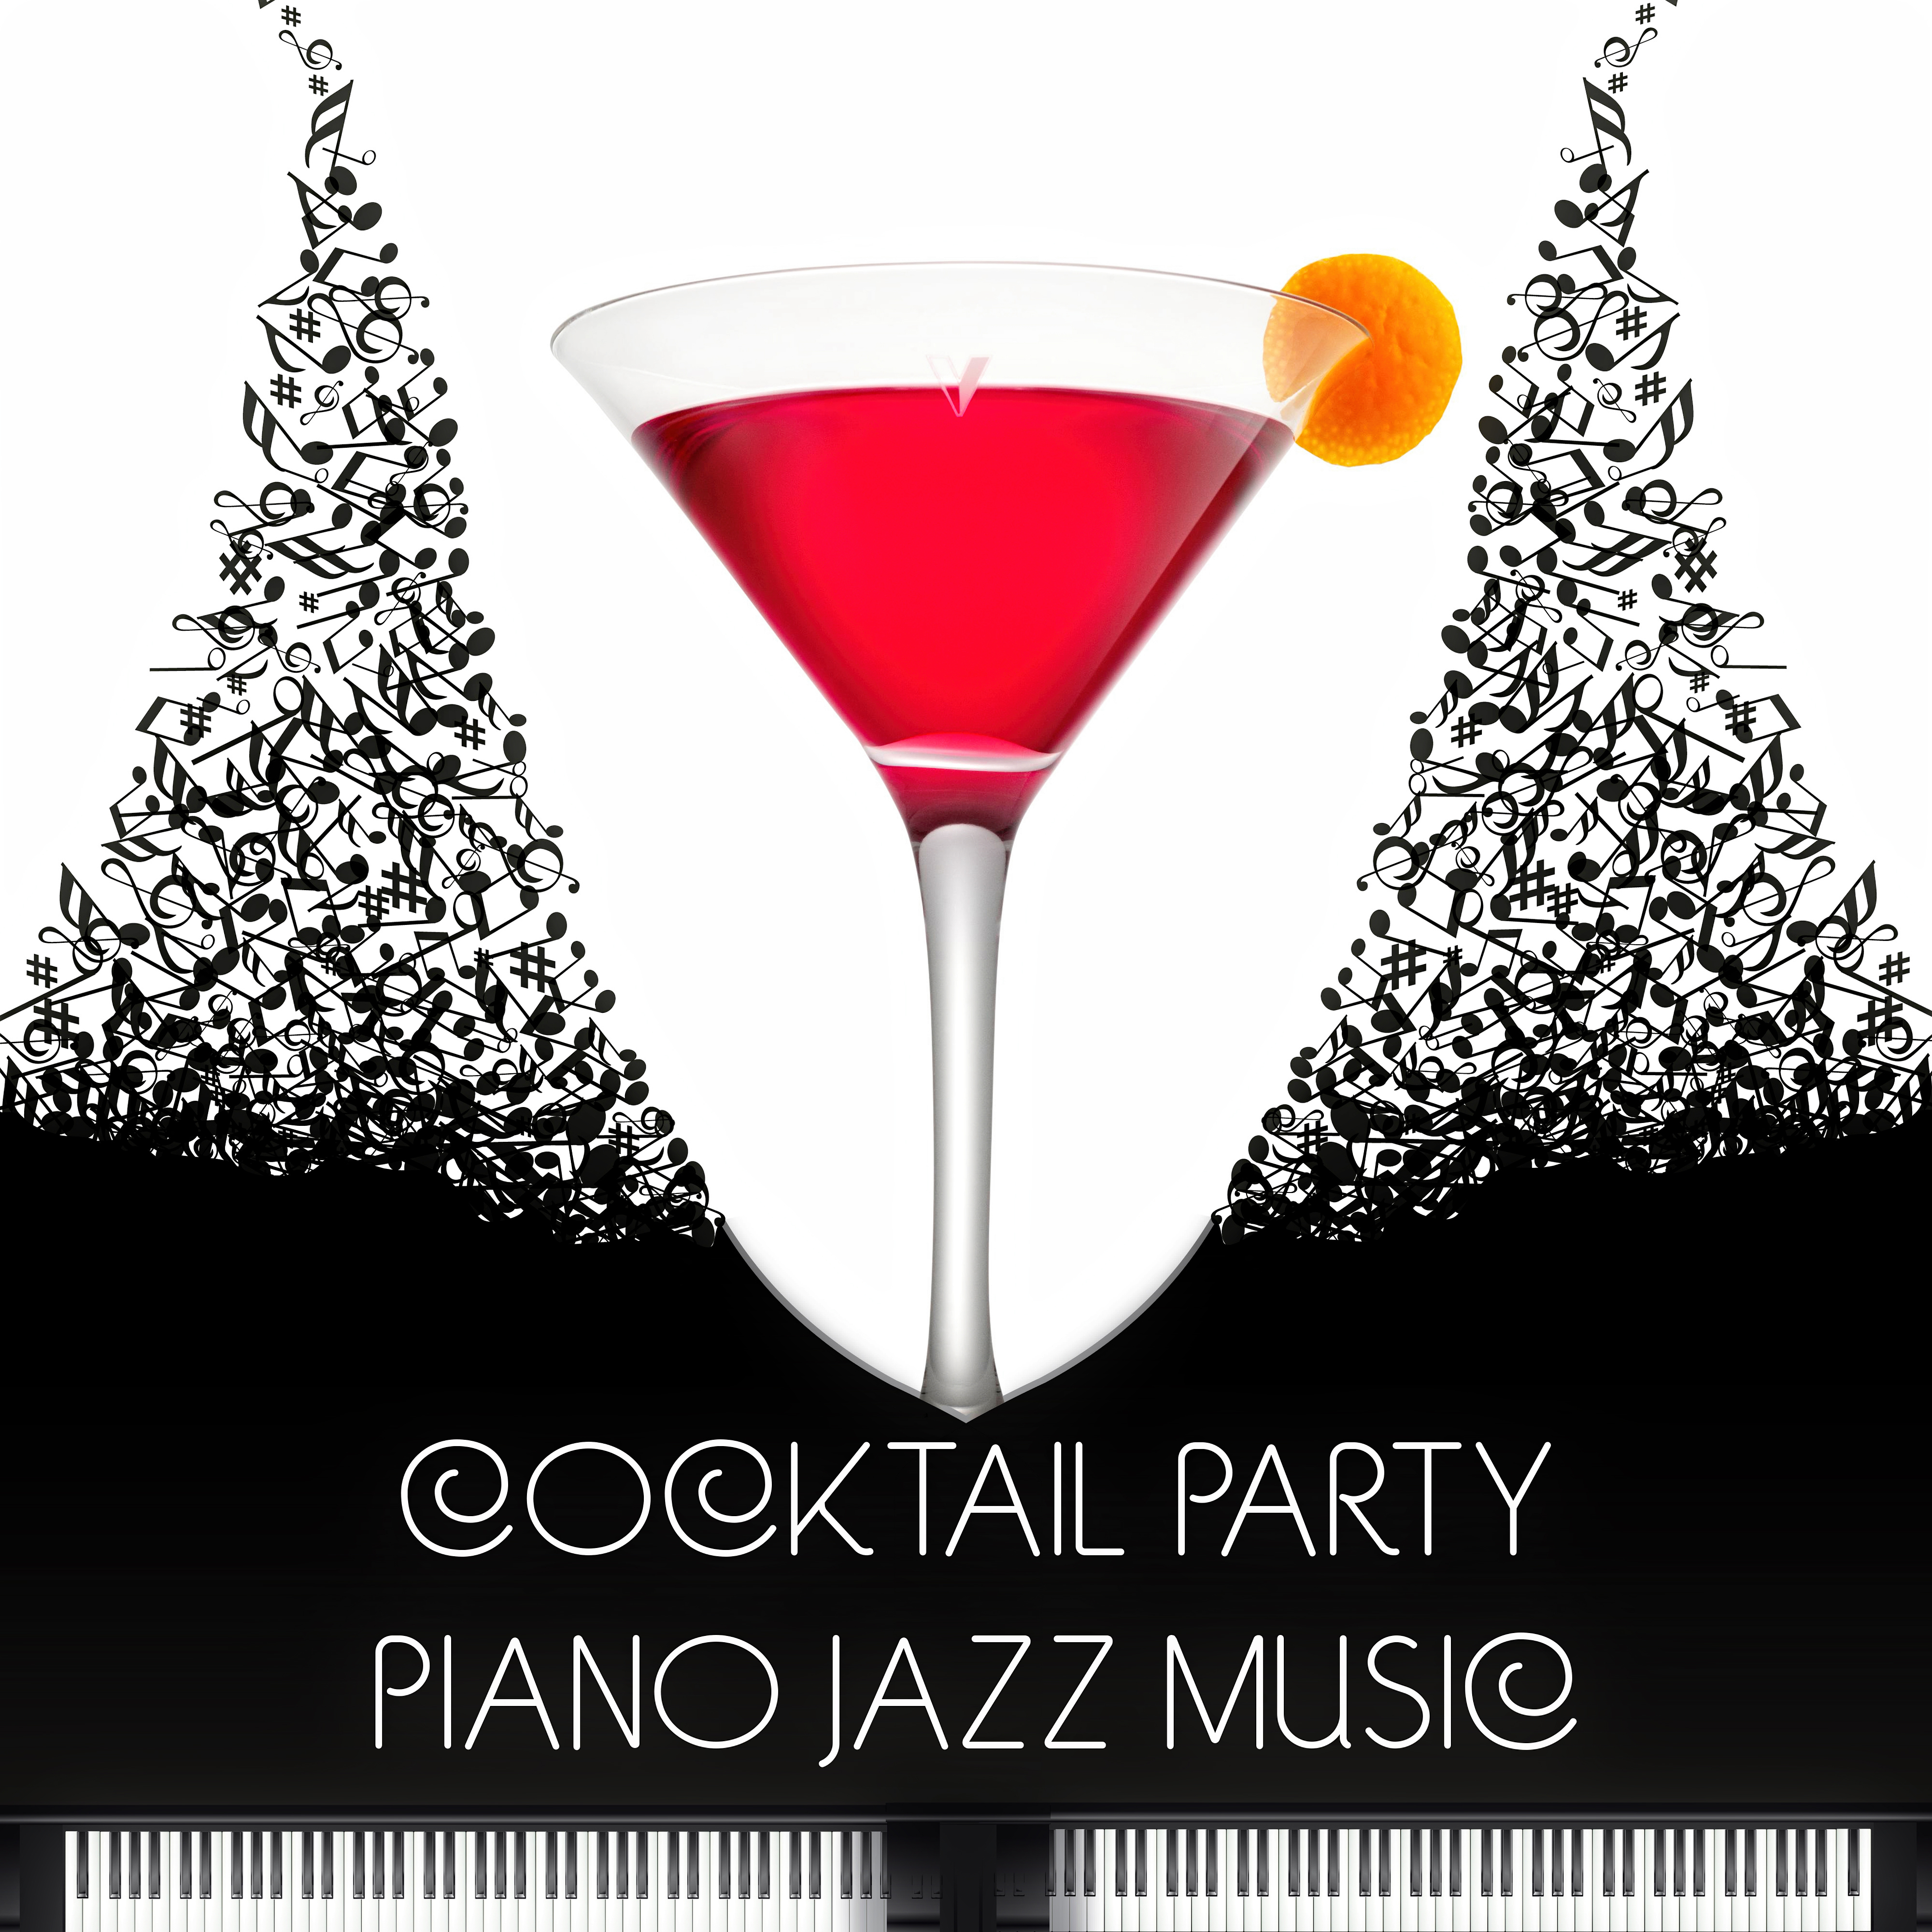 Cocktail Party Piano Jazz Music  - Soothing Music for Dinner Party, Family Time, Jazz for Entertaining